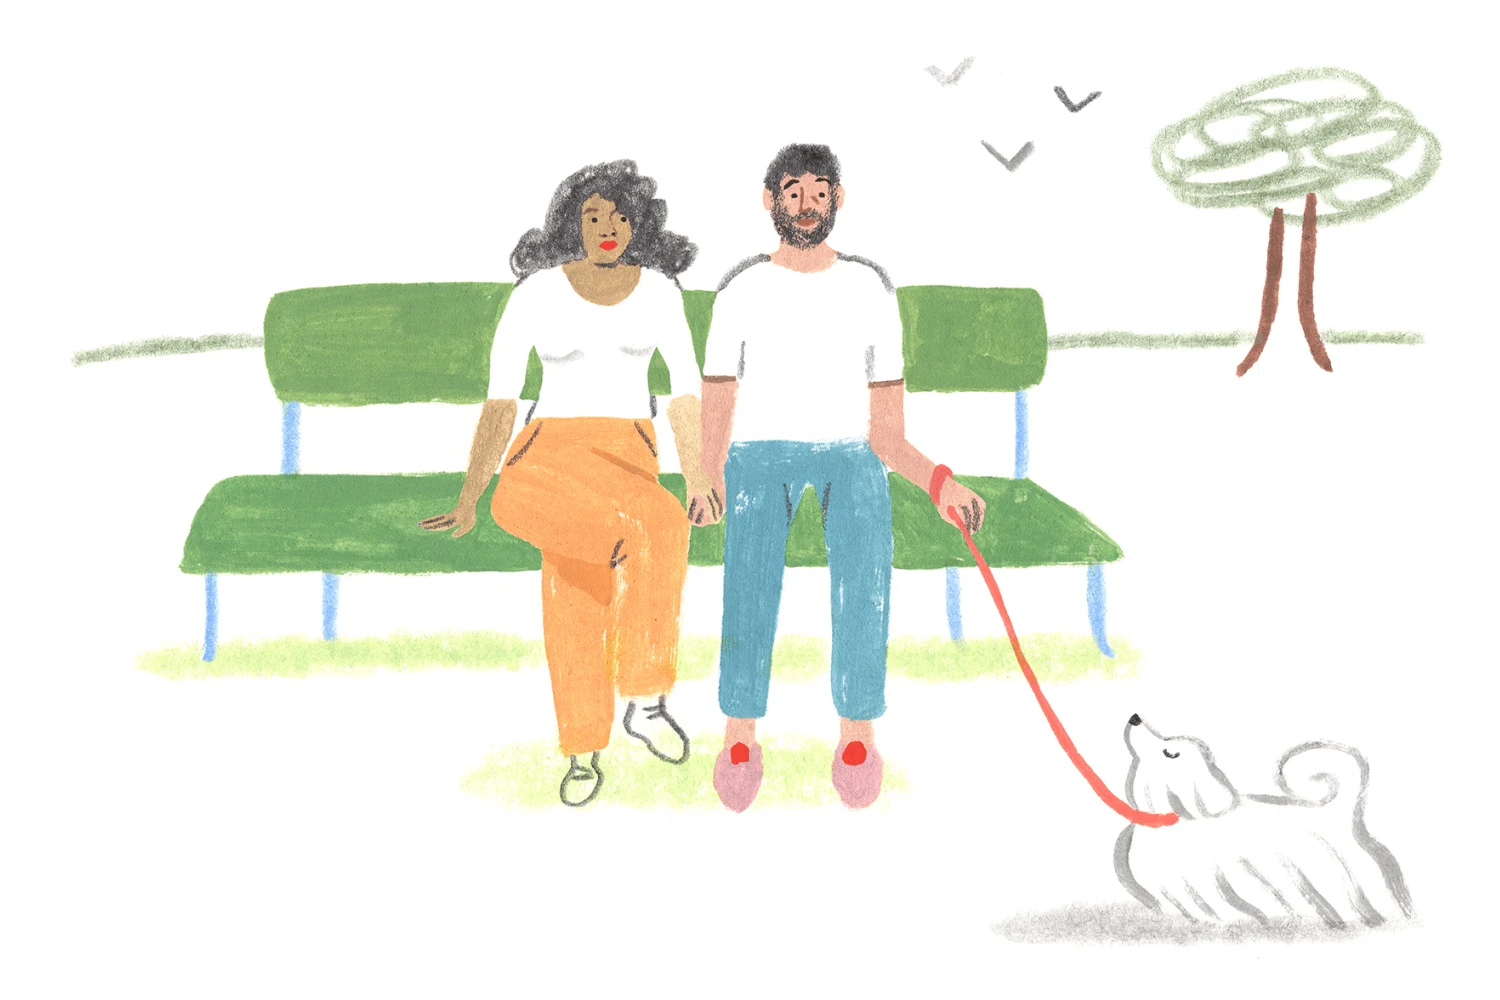 A Monarch original illustration of a couple sitting on a bench with their dog and enjoying each other’s company away from phones